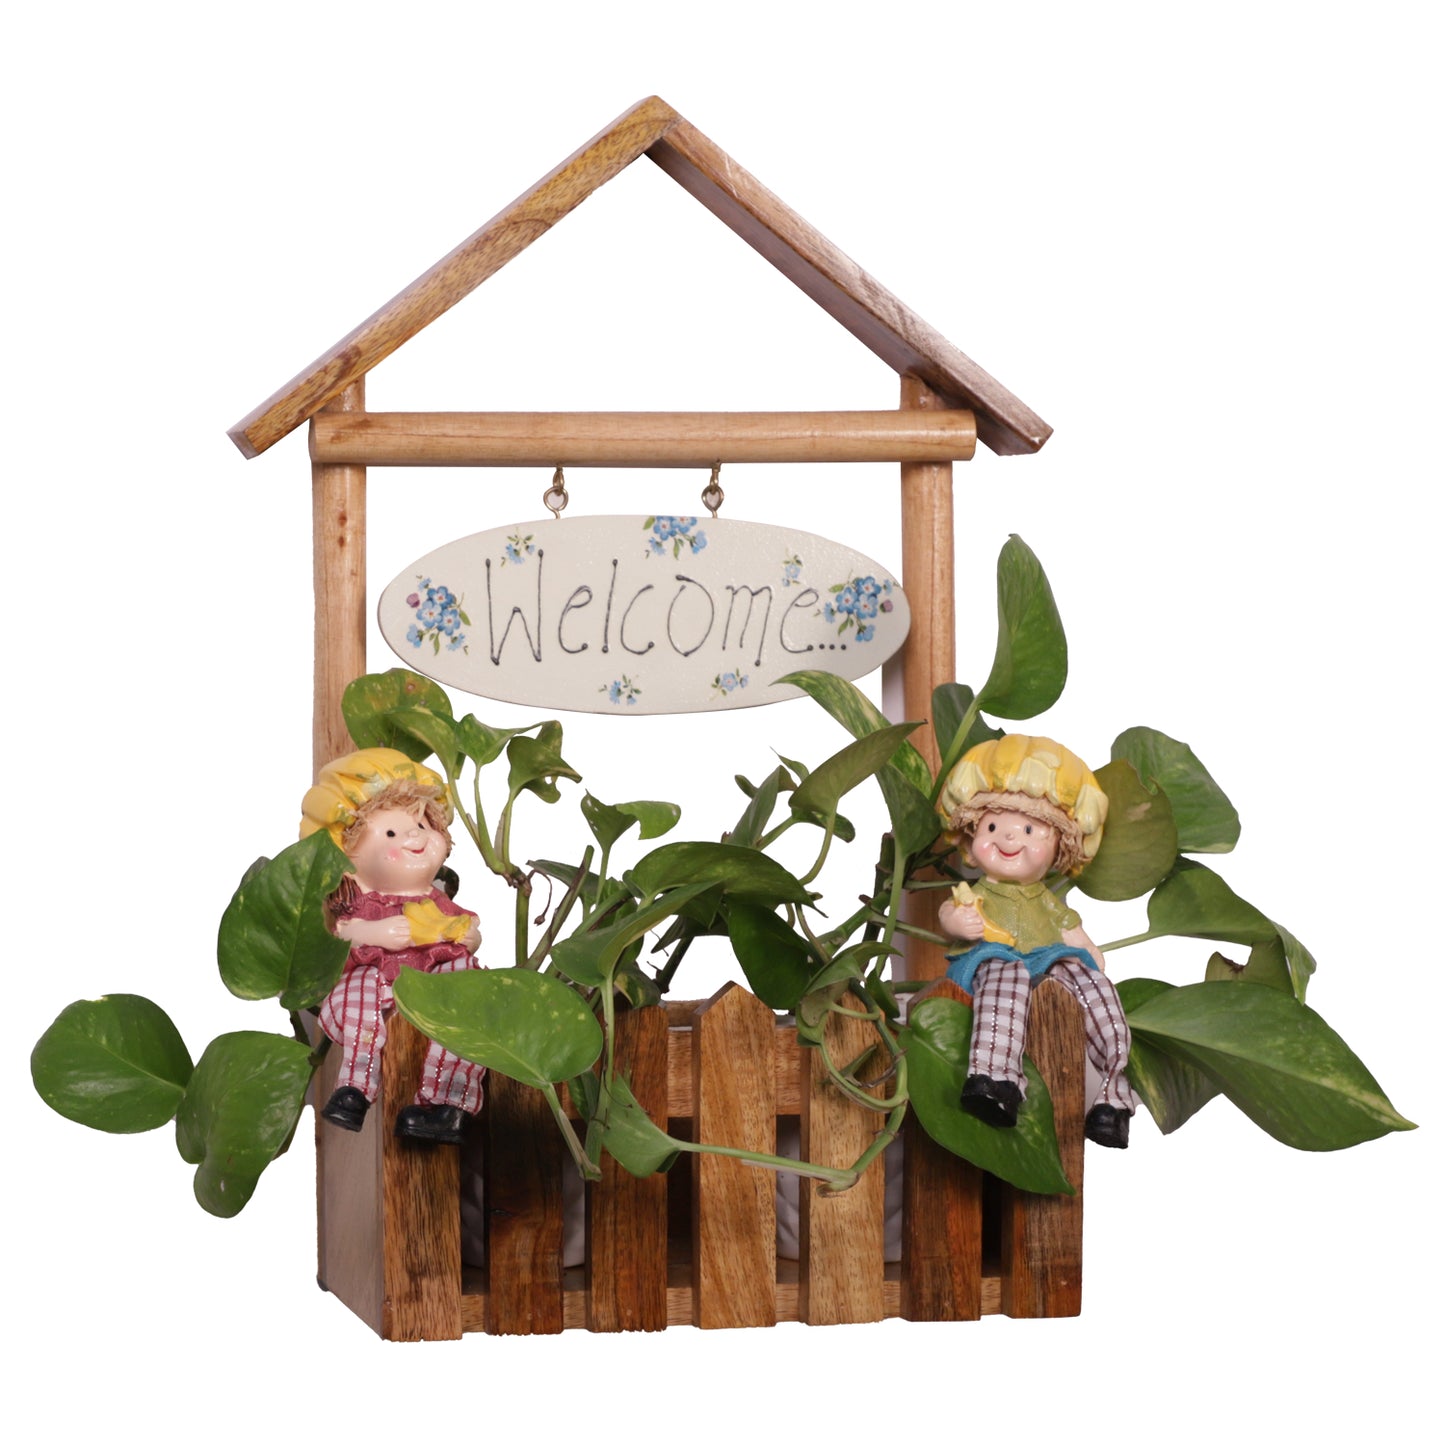 The Weaver's Nest Wooden Welcome Fence Planter